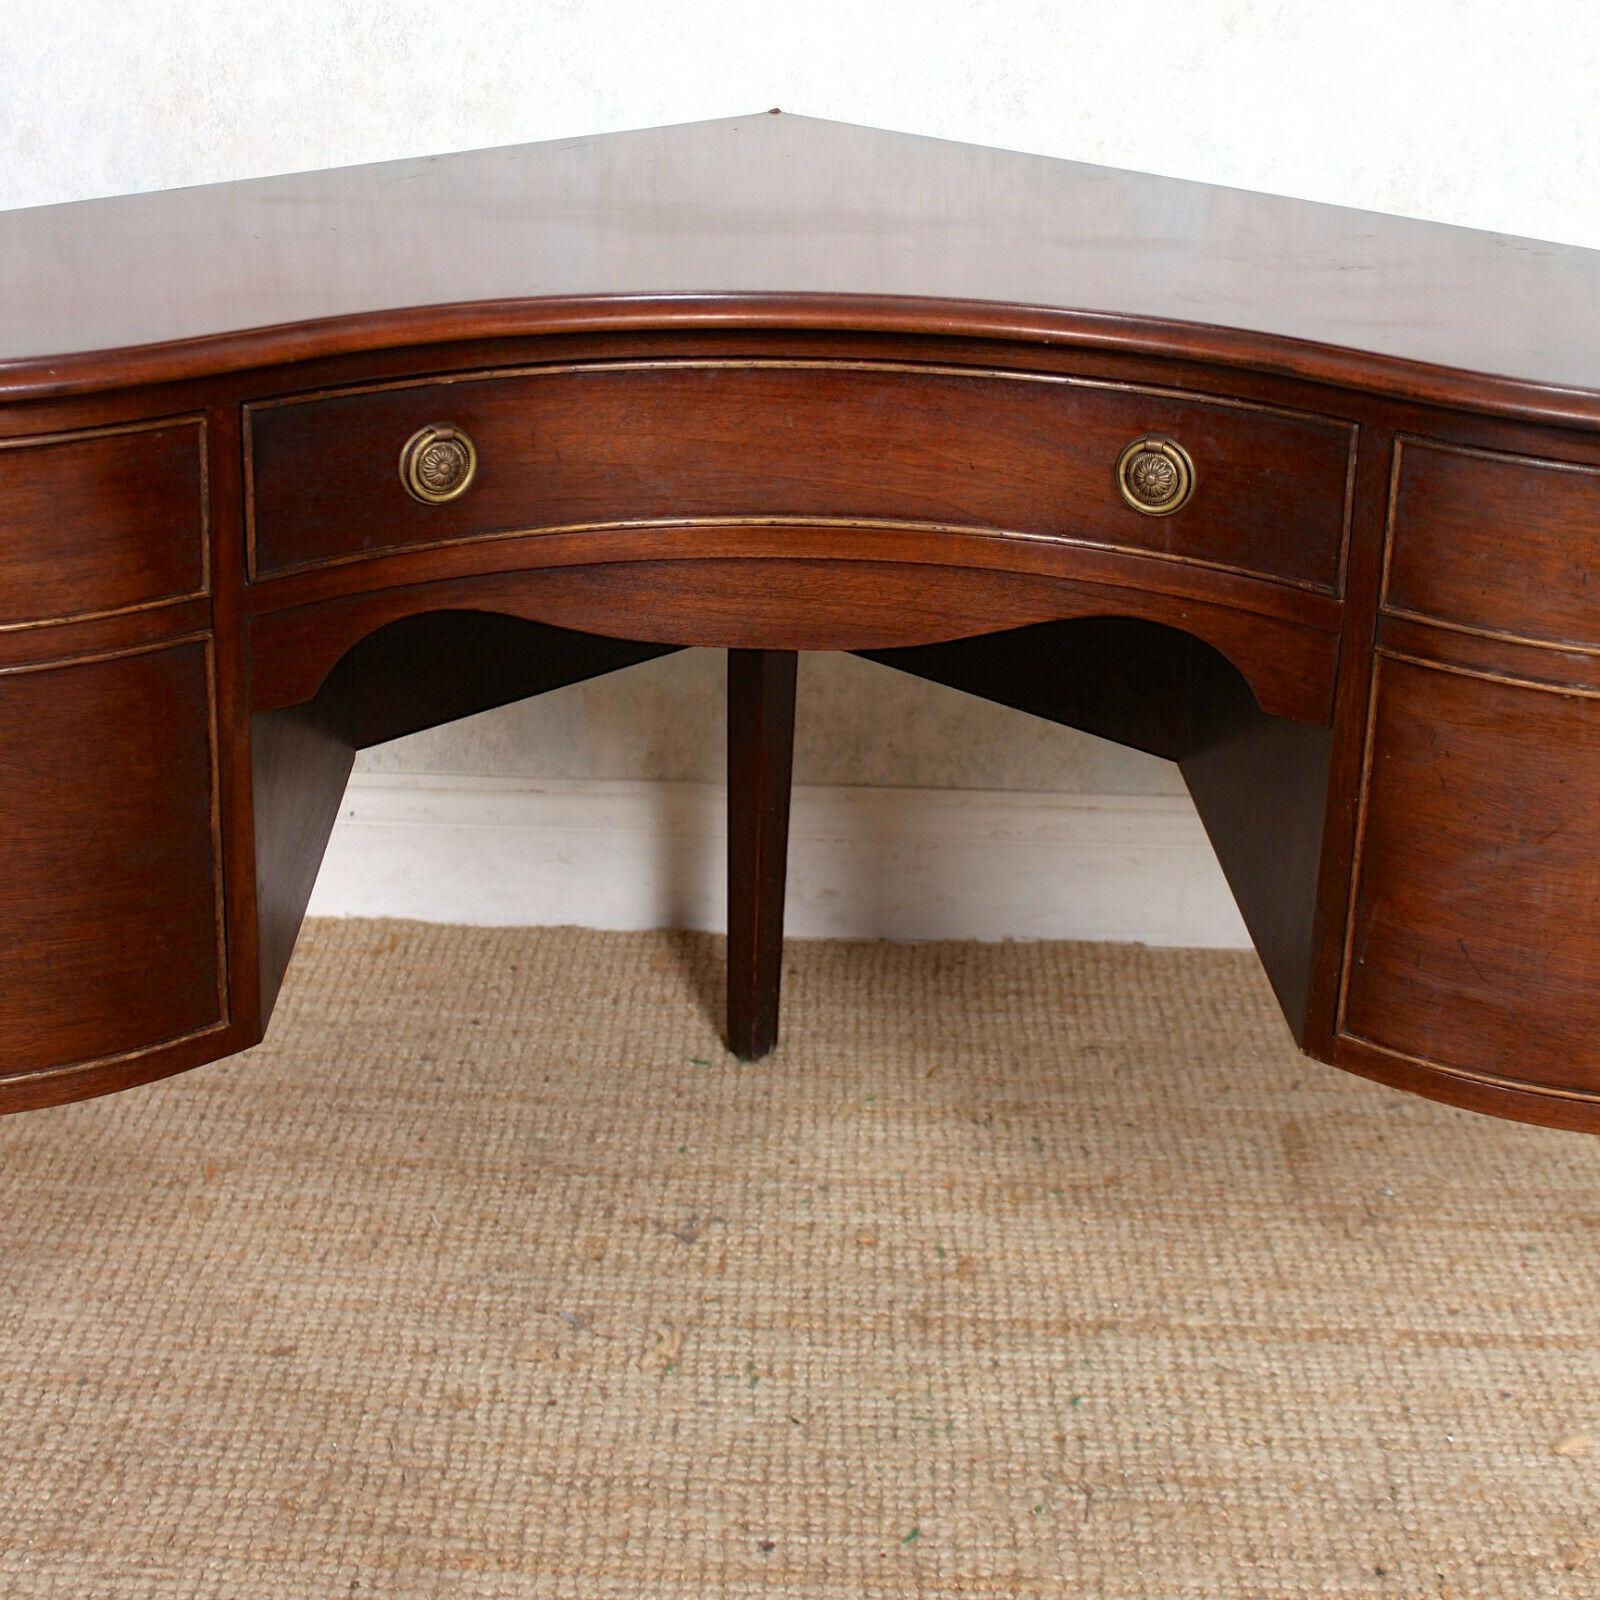 20th Century English Corner Desk Writing Table Bevan Funnell Mahogany Antique Vintage For Sale